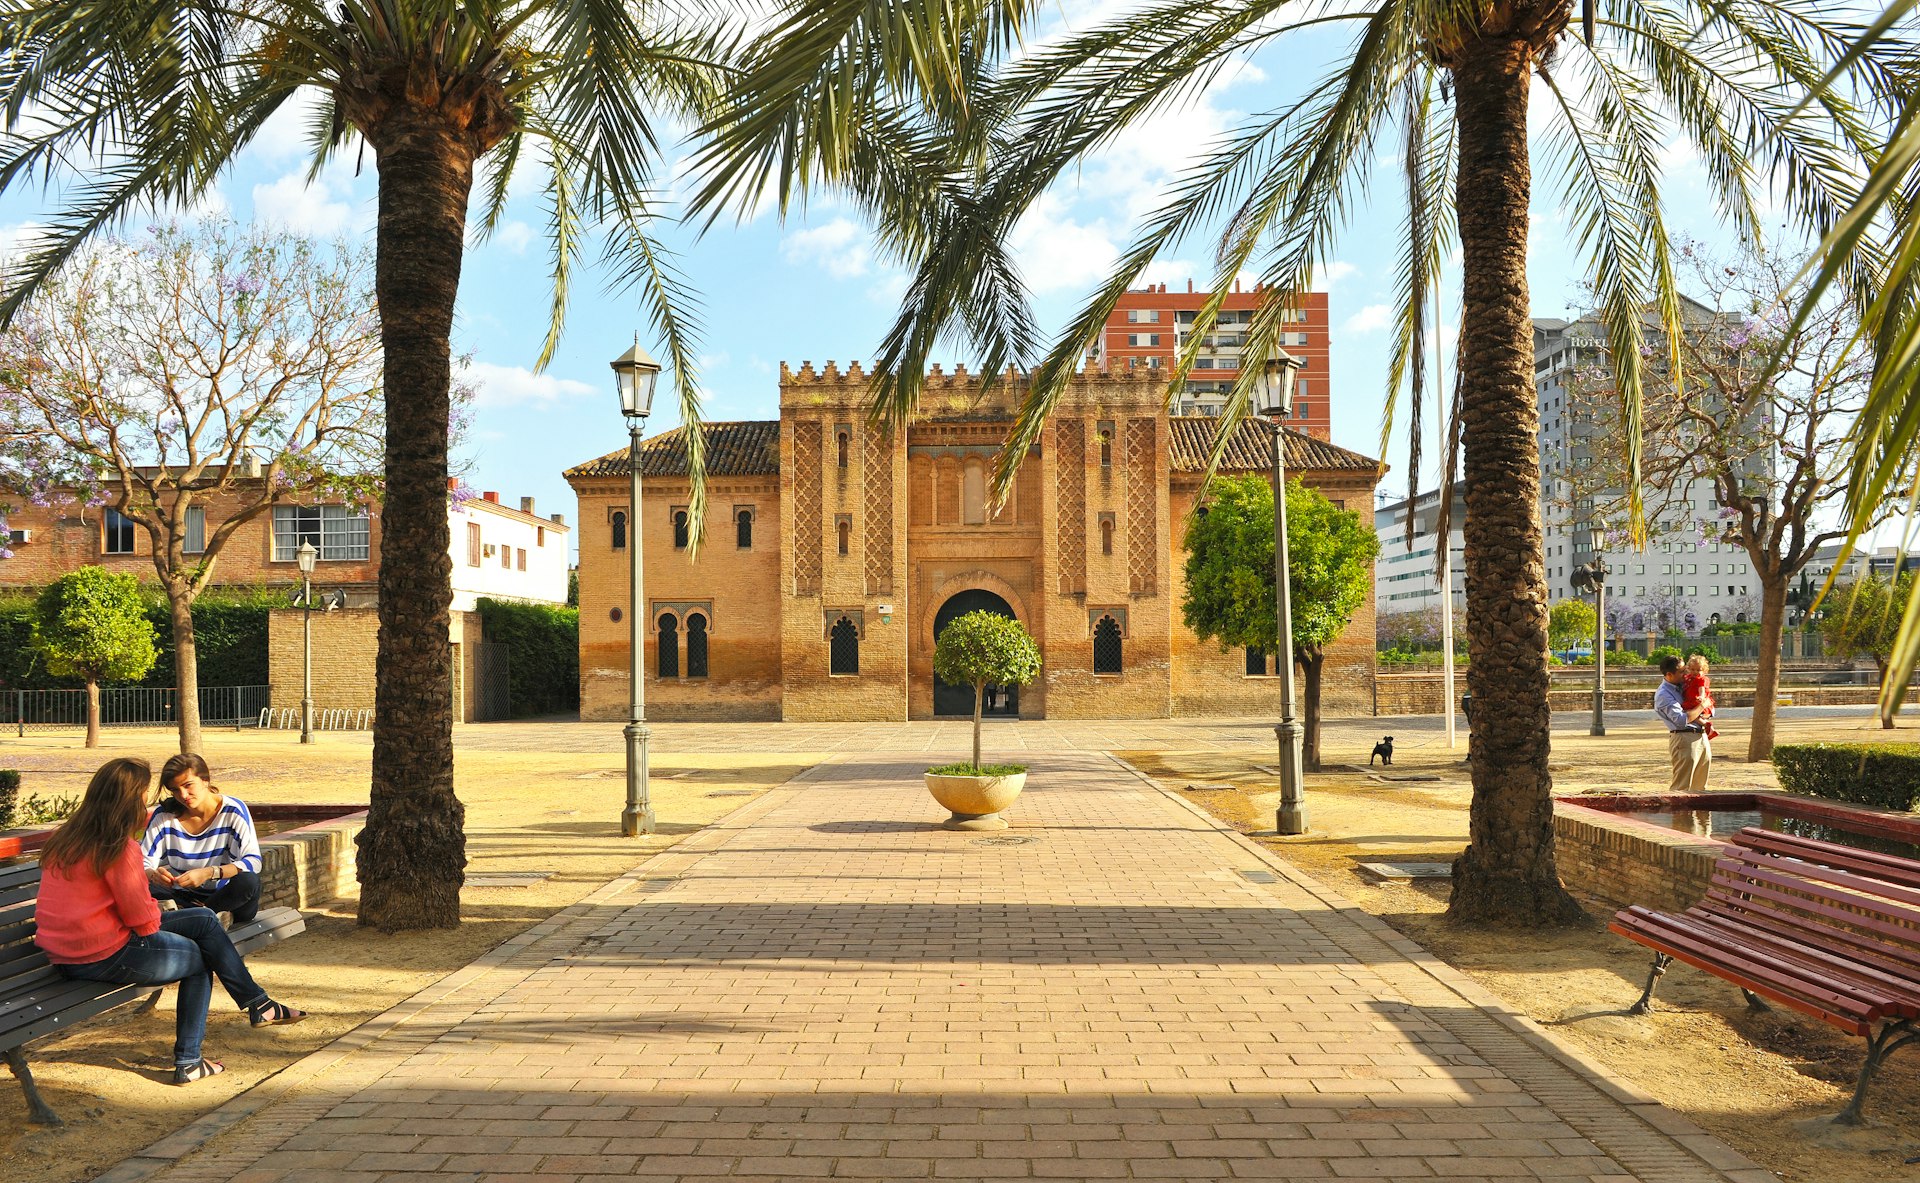 People on benches under date palms in front of a historic palace at Jardines de la Buhaira, Sevilla, España